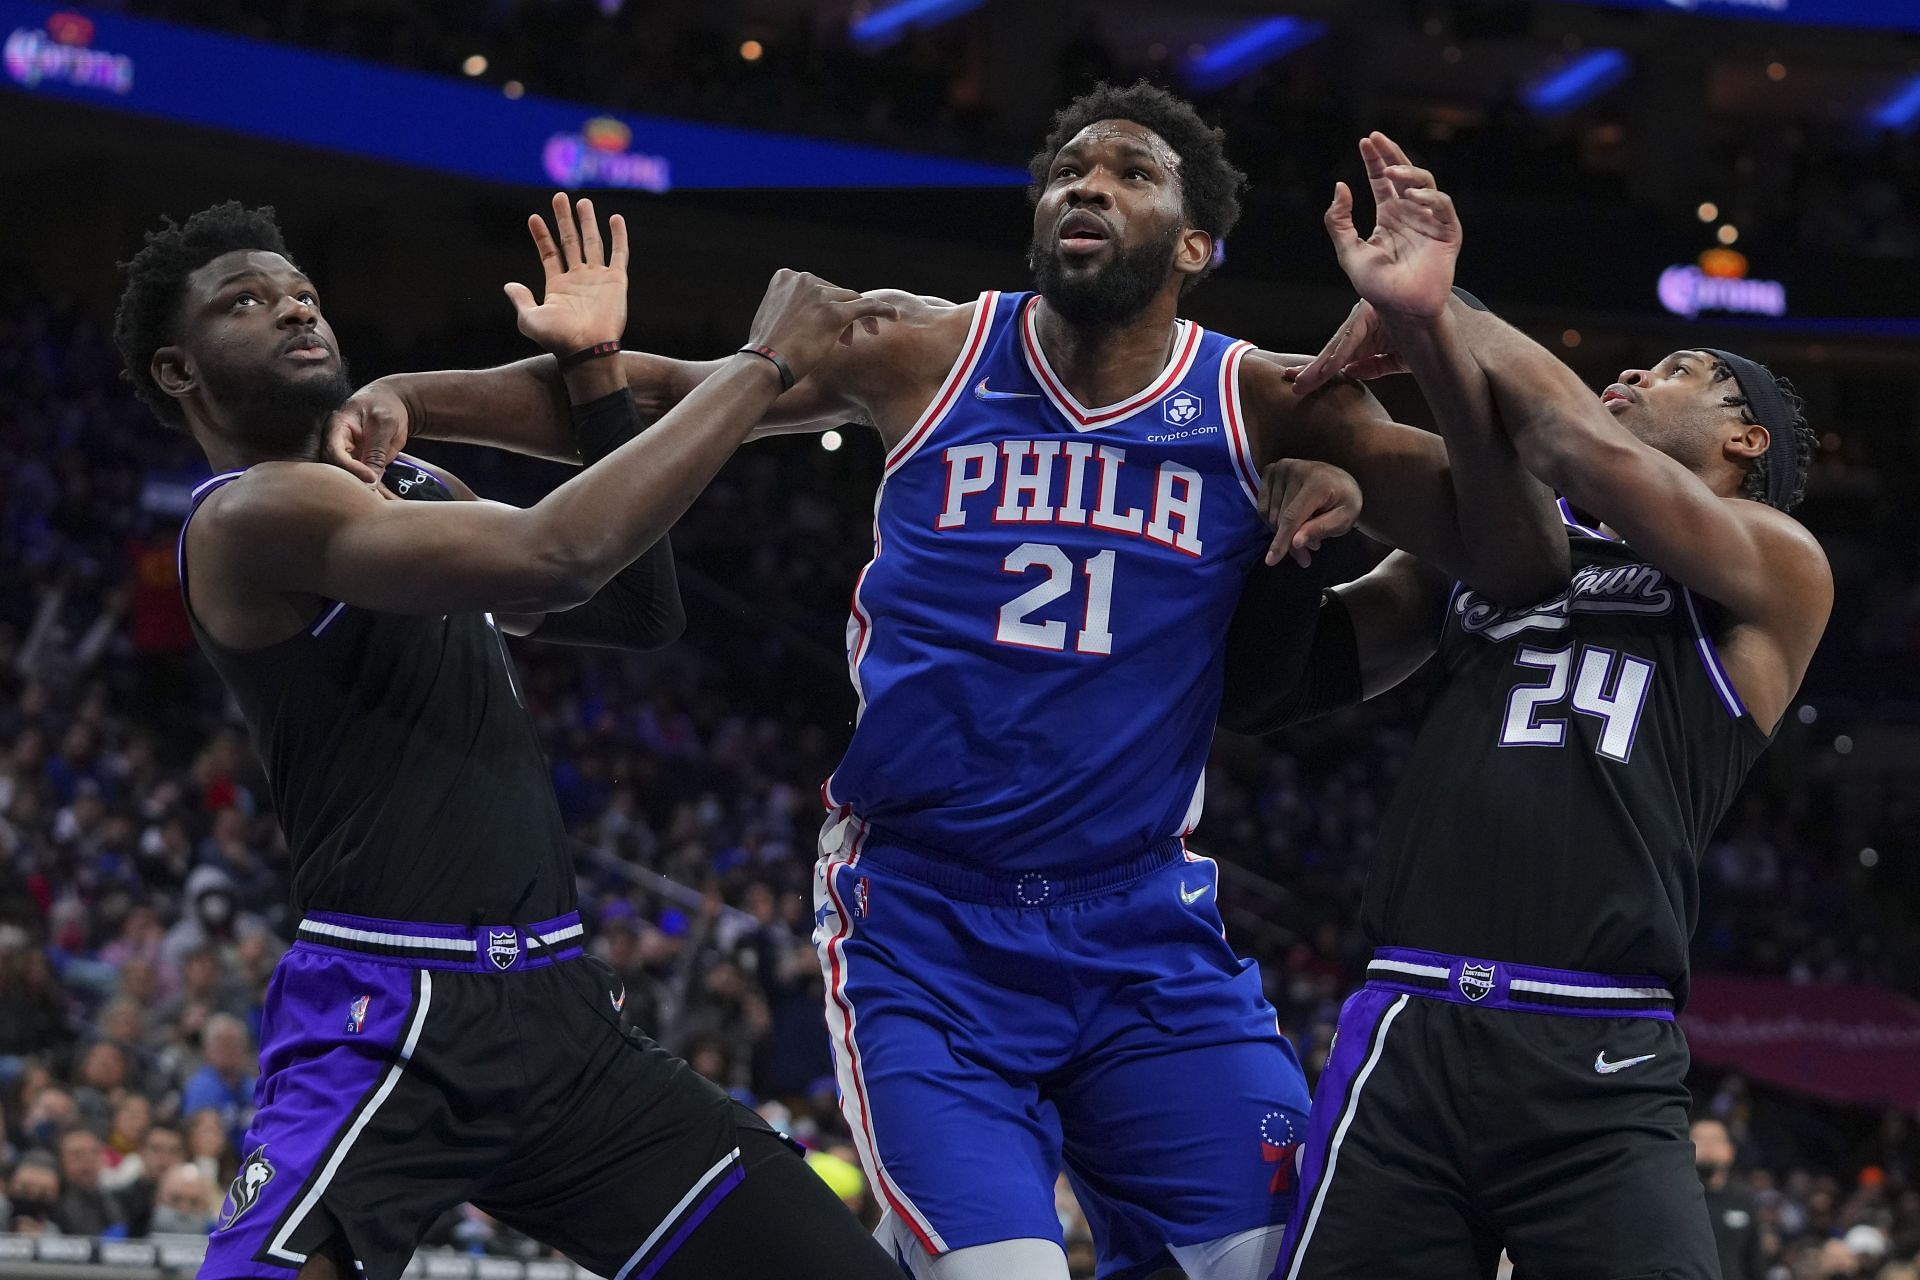 Chimezie Metu n(left) and Buddy Hield (24) of the Sacramento Kings attempt to box out Joel Embiid of the Philadelphia 76ers